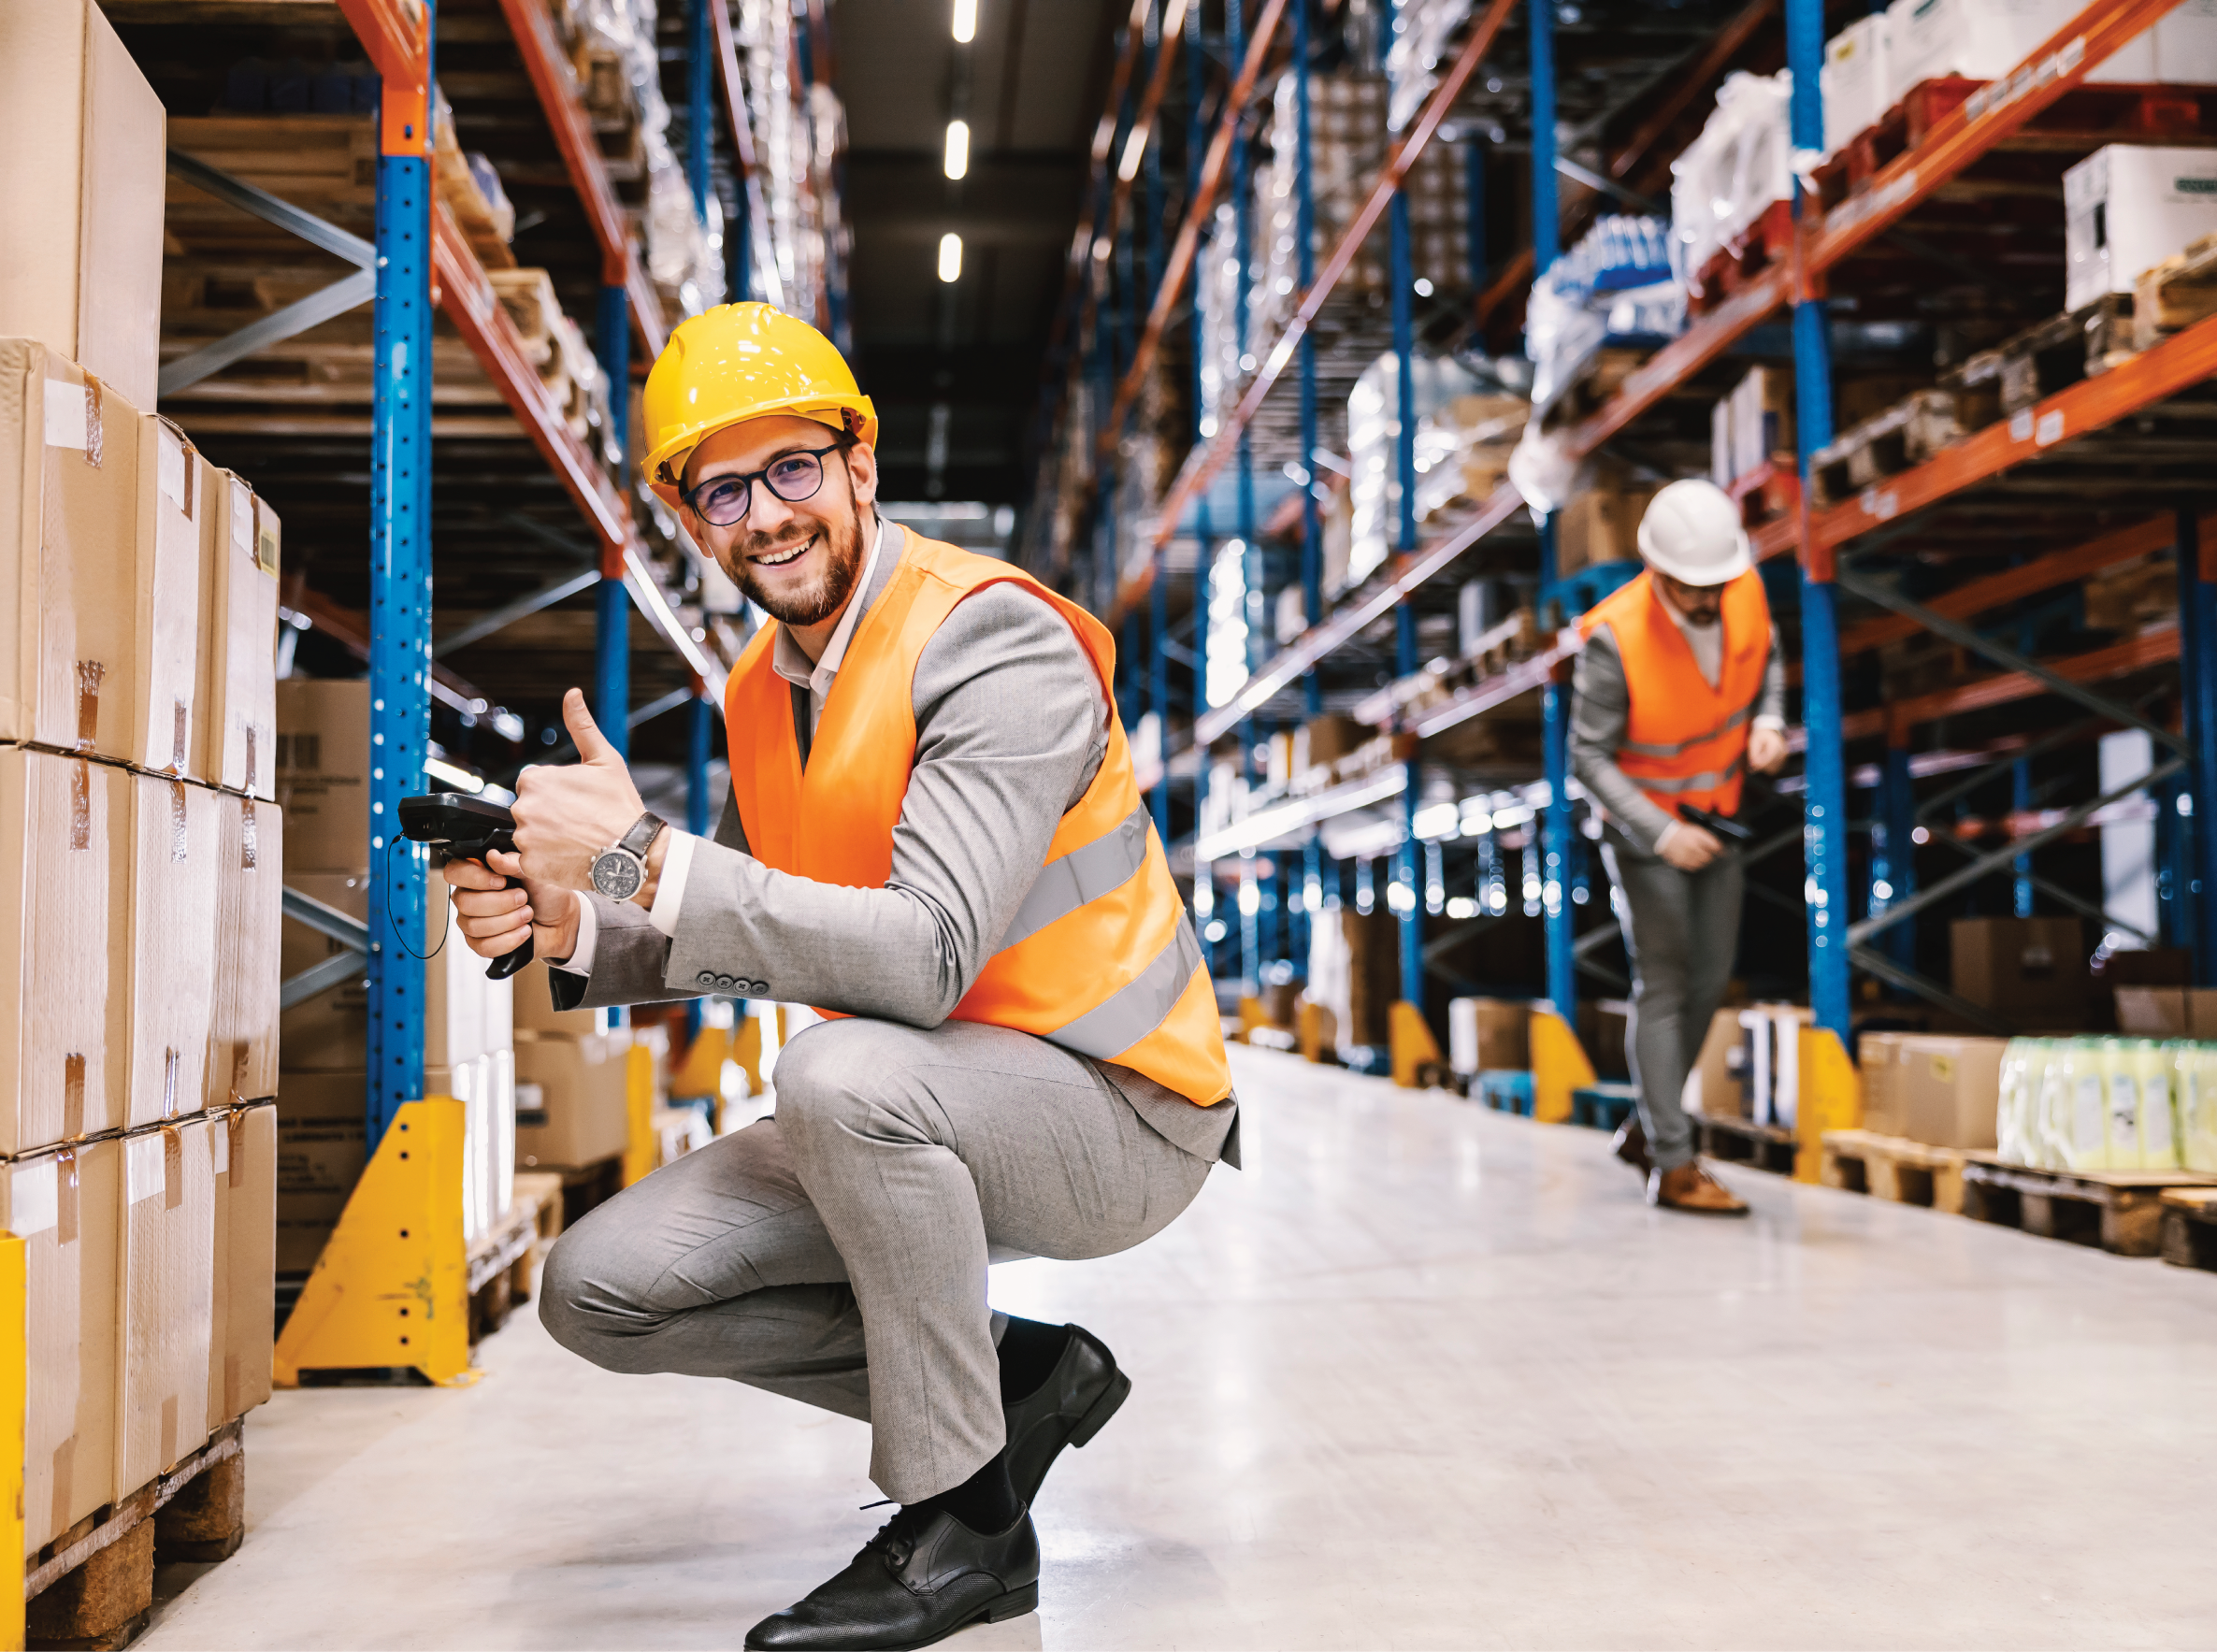 A supervisor giving thumbs up for order and holding bar and qr code scanner in warehouse.